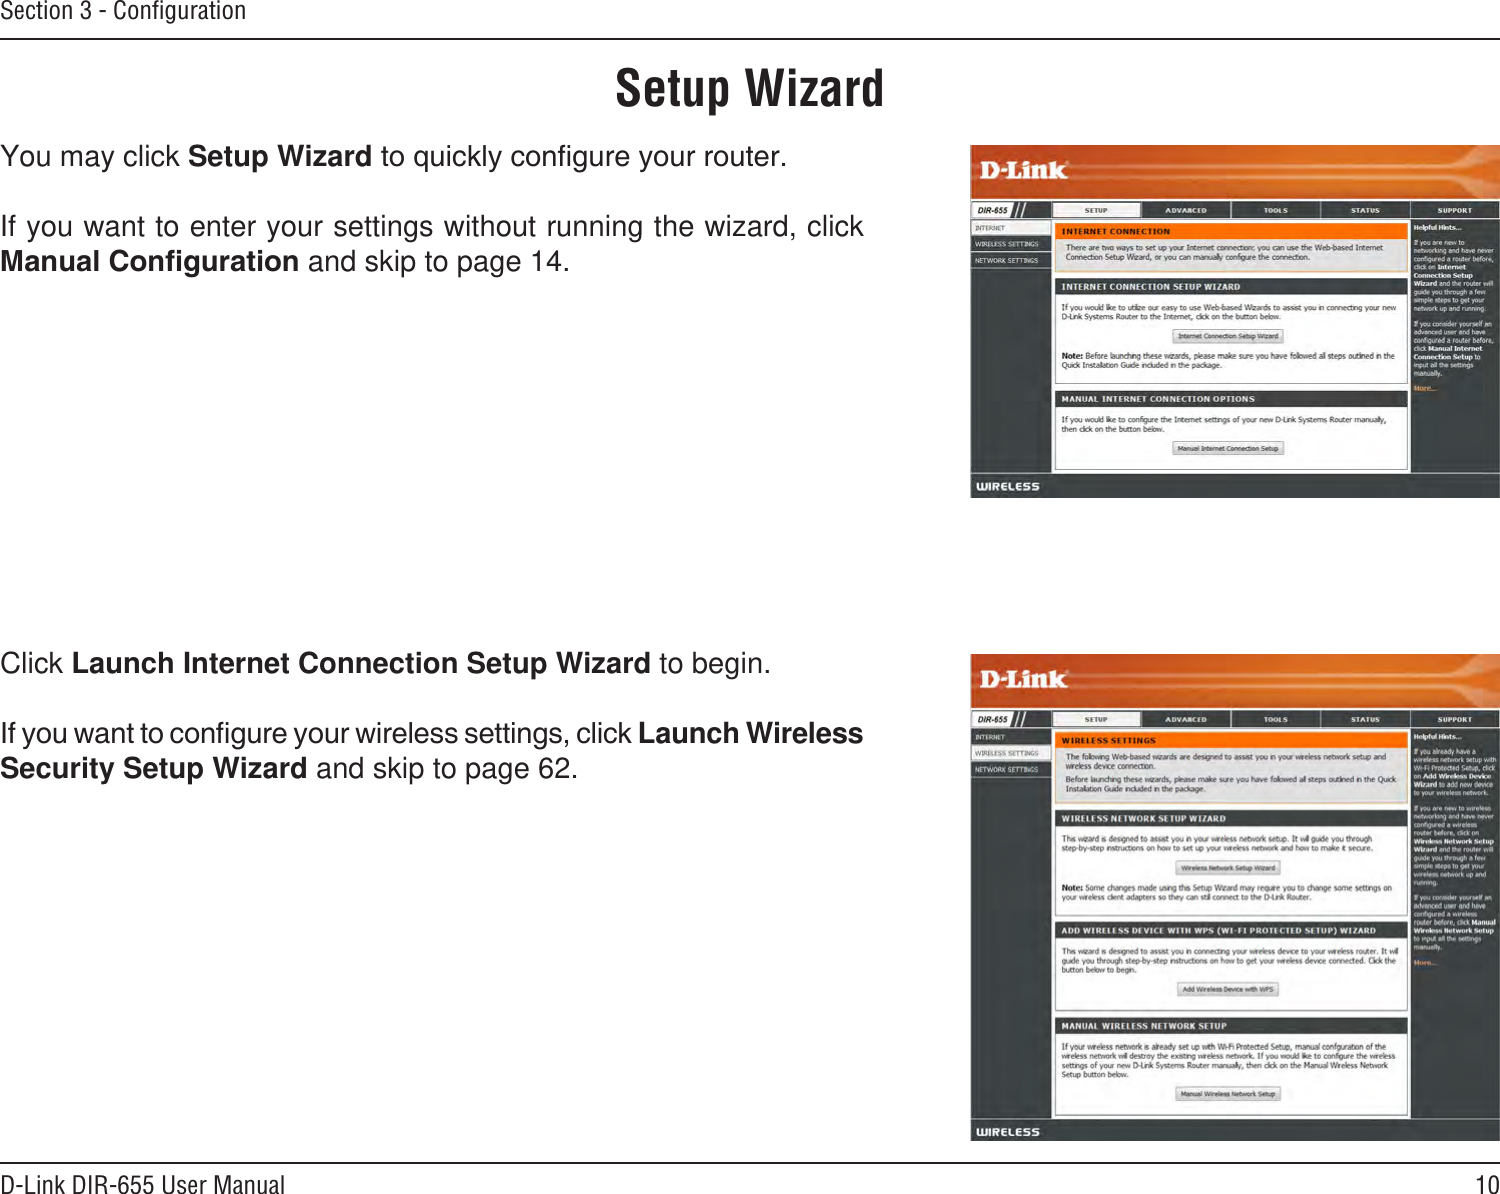 10D-Link DIR-655 User ManualSection 3 - ConﬁgurationSetup WizardYou may click Setup WizardIf you want to enter your settings without running the wizard, click  and skip to page 14.Click Launch Internet Connection Setup Wizard to begin.Launch Wireless Security Setup Wizard and skip to page 62.